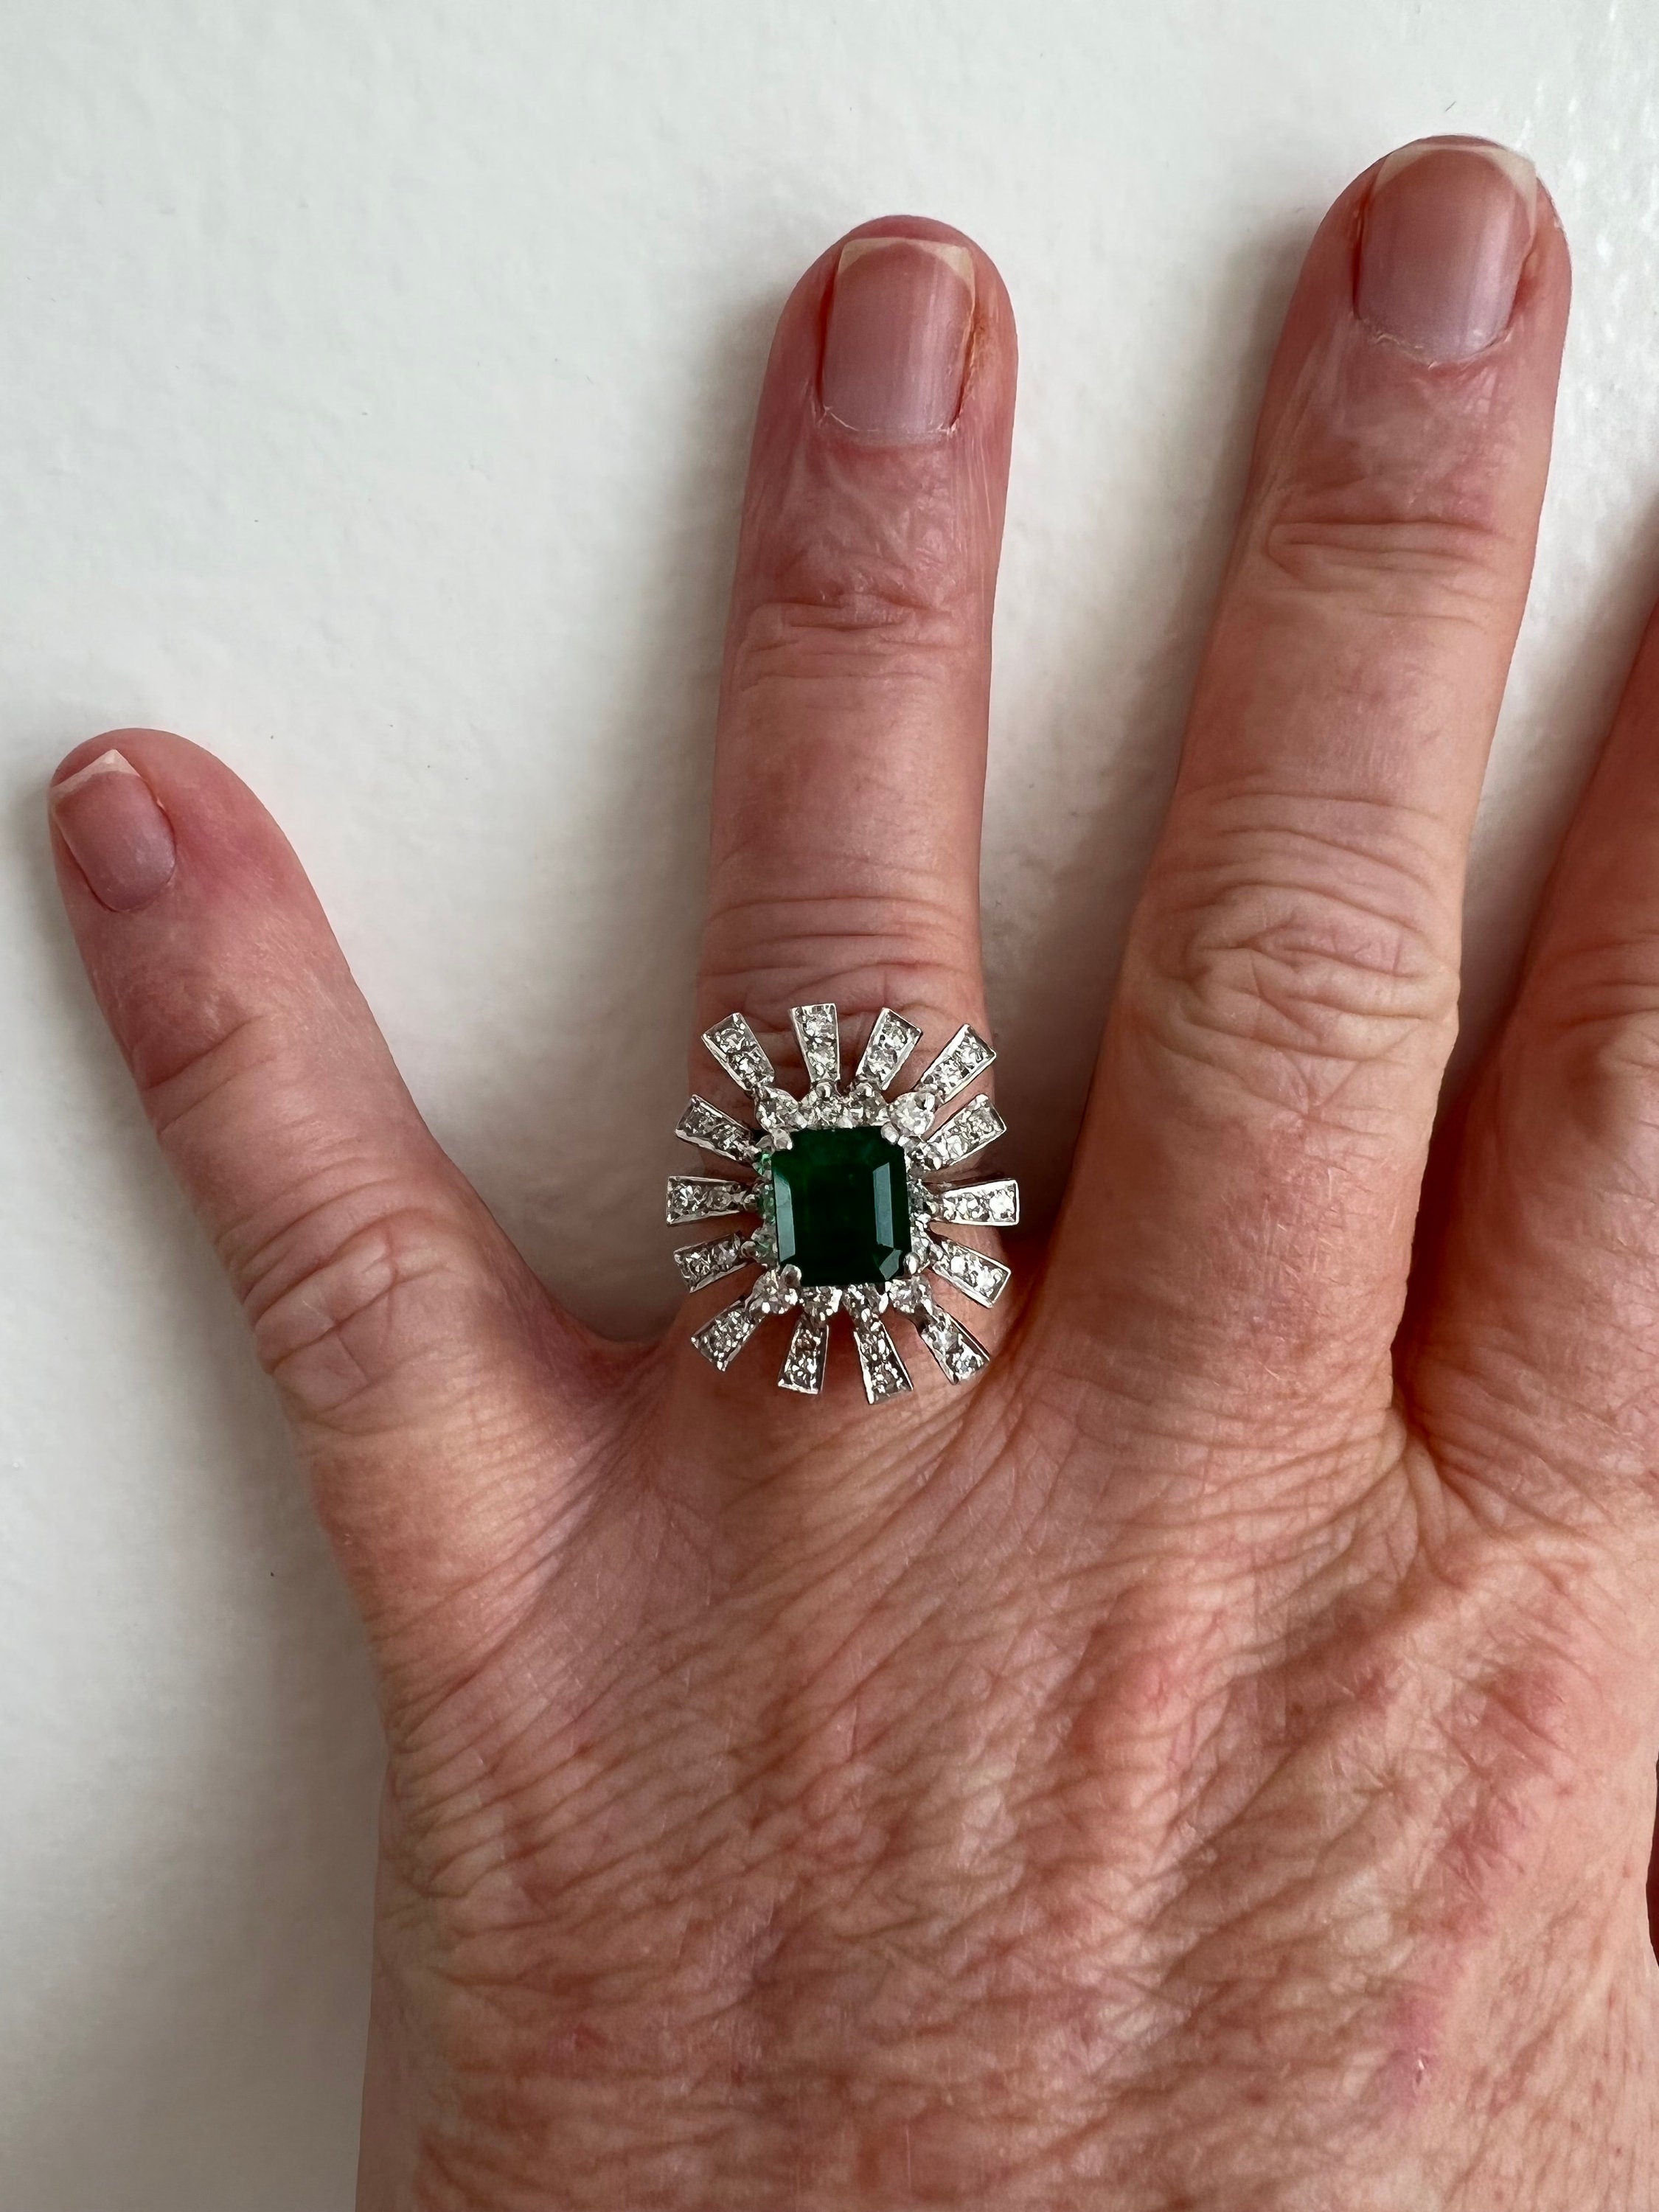 Retro Vintage 18K White Gold Diamond and Emerald Cluster Engagement Ring - 2.76ct.